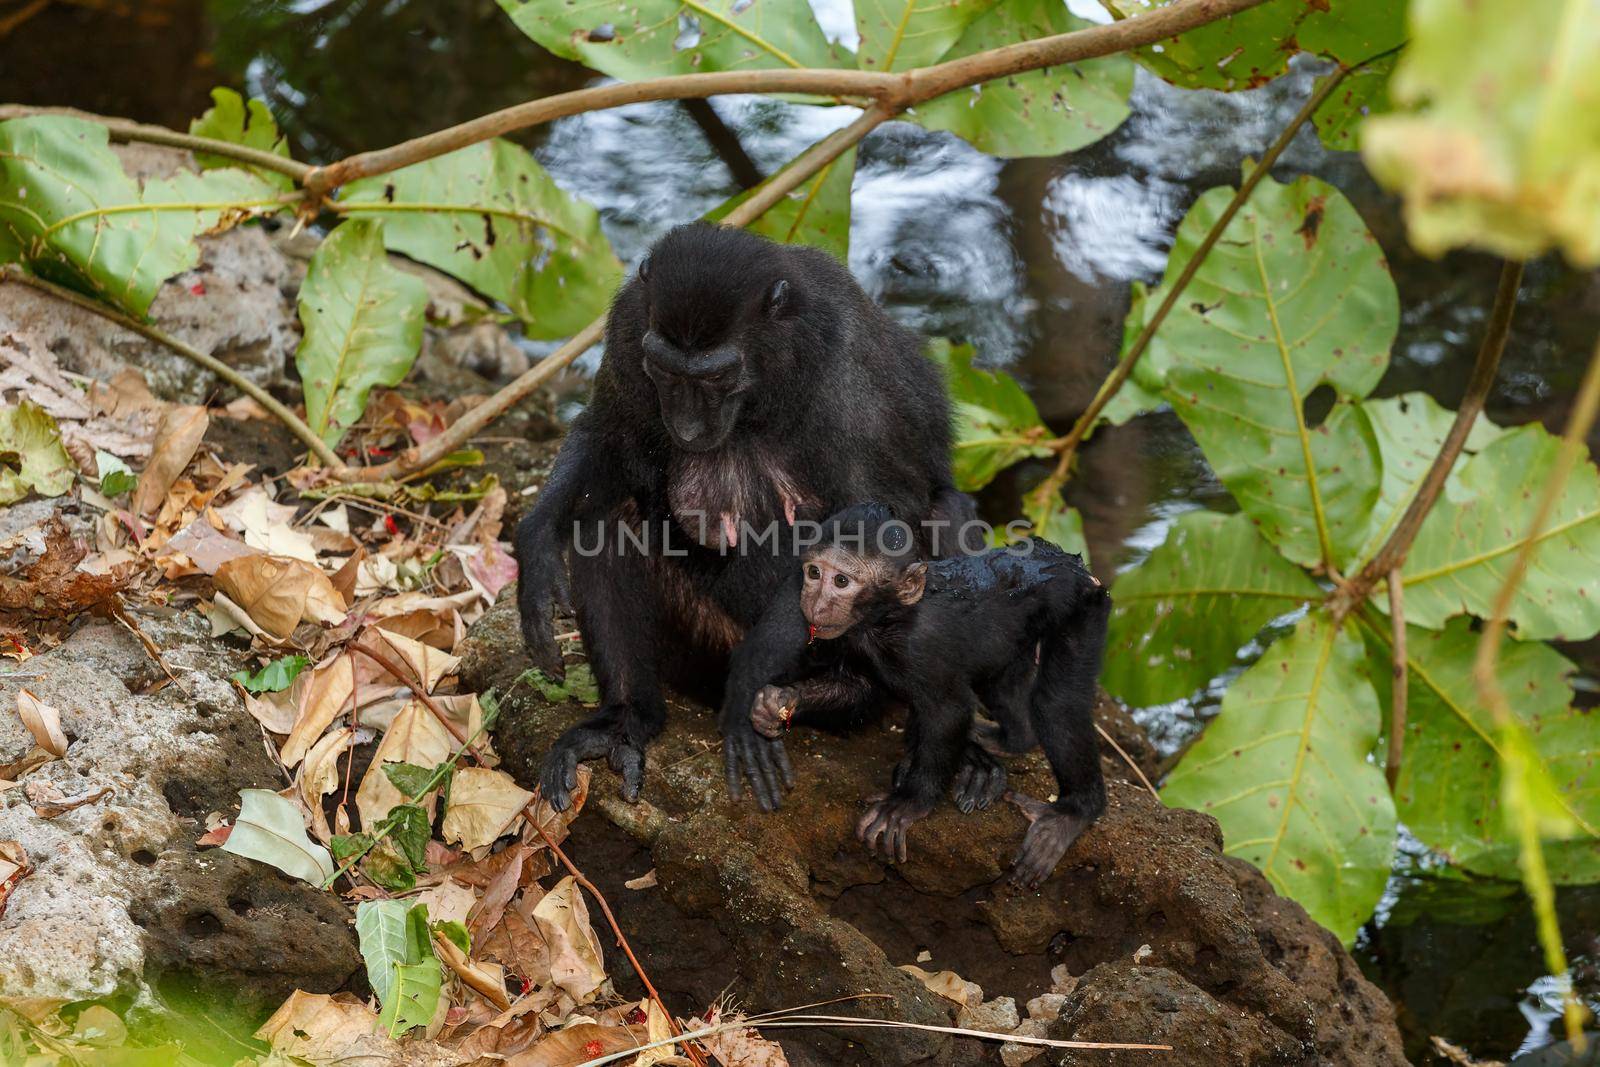 Endemic monkey Celebes crested macaque (Macaca nigra) known as black monkey, mother with baby in rainforest, Tangkoko Nature Reserve in North Sulawesi, Indonesia wildlife